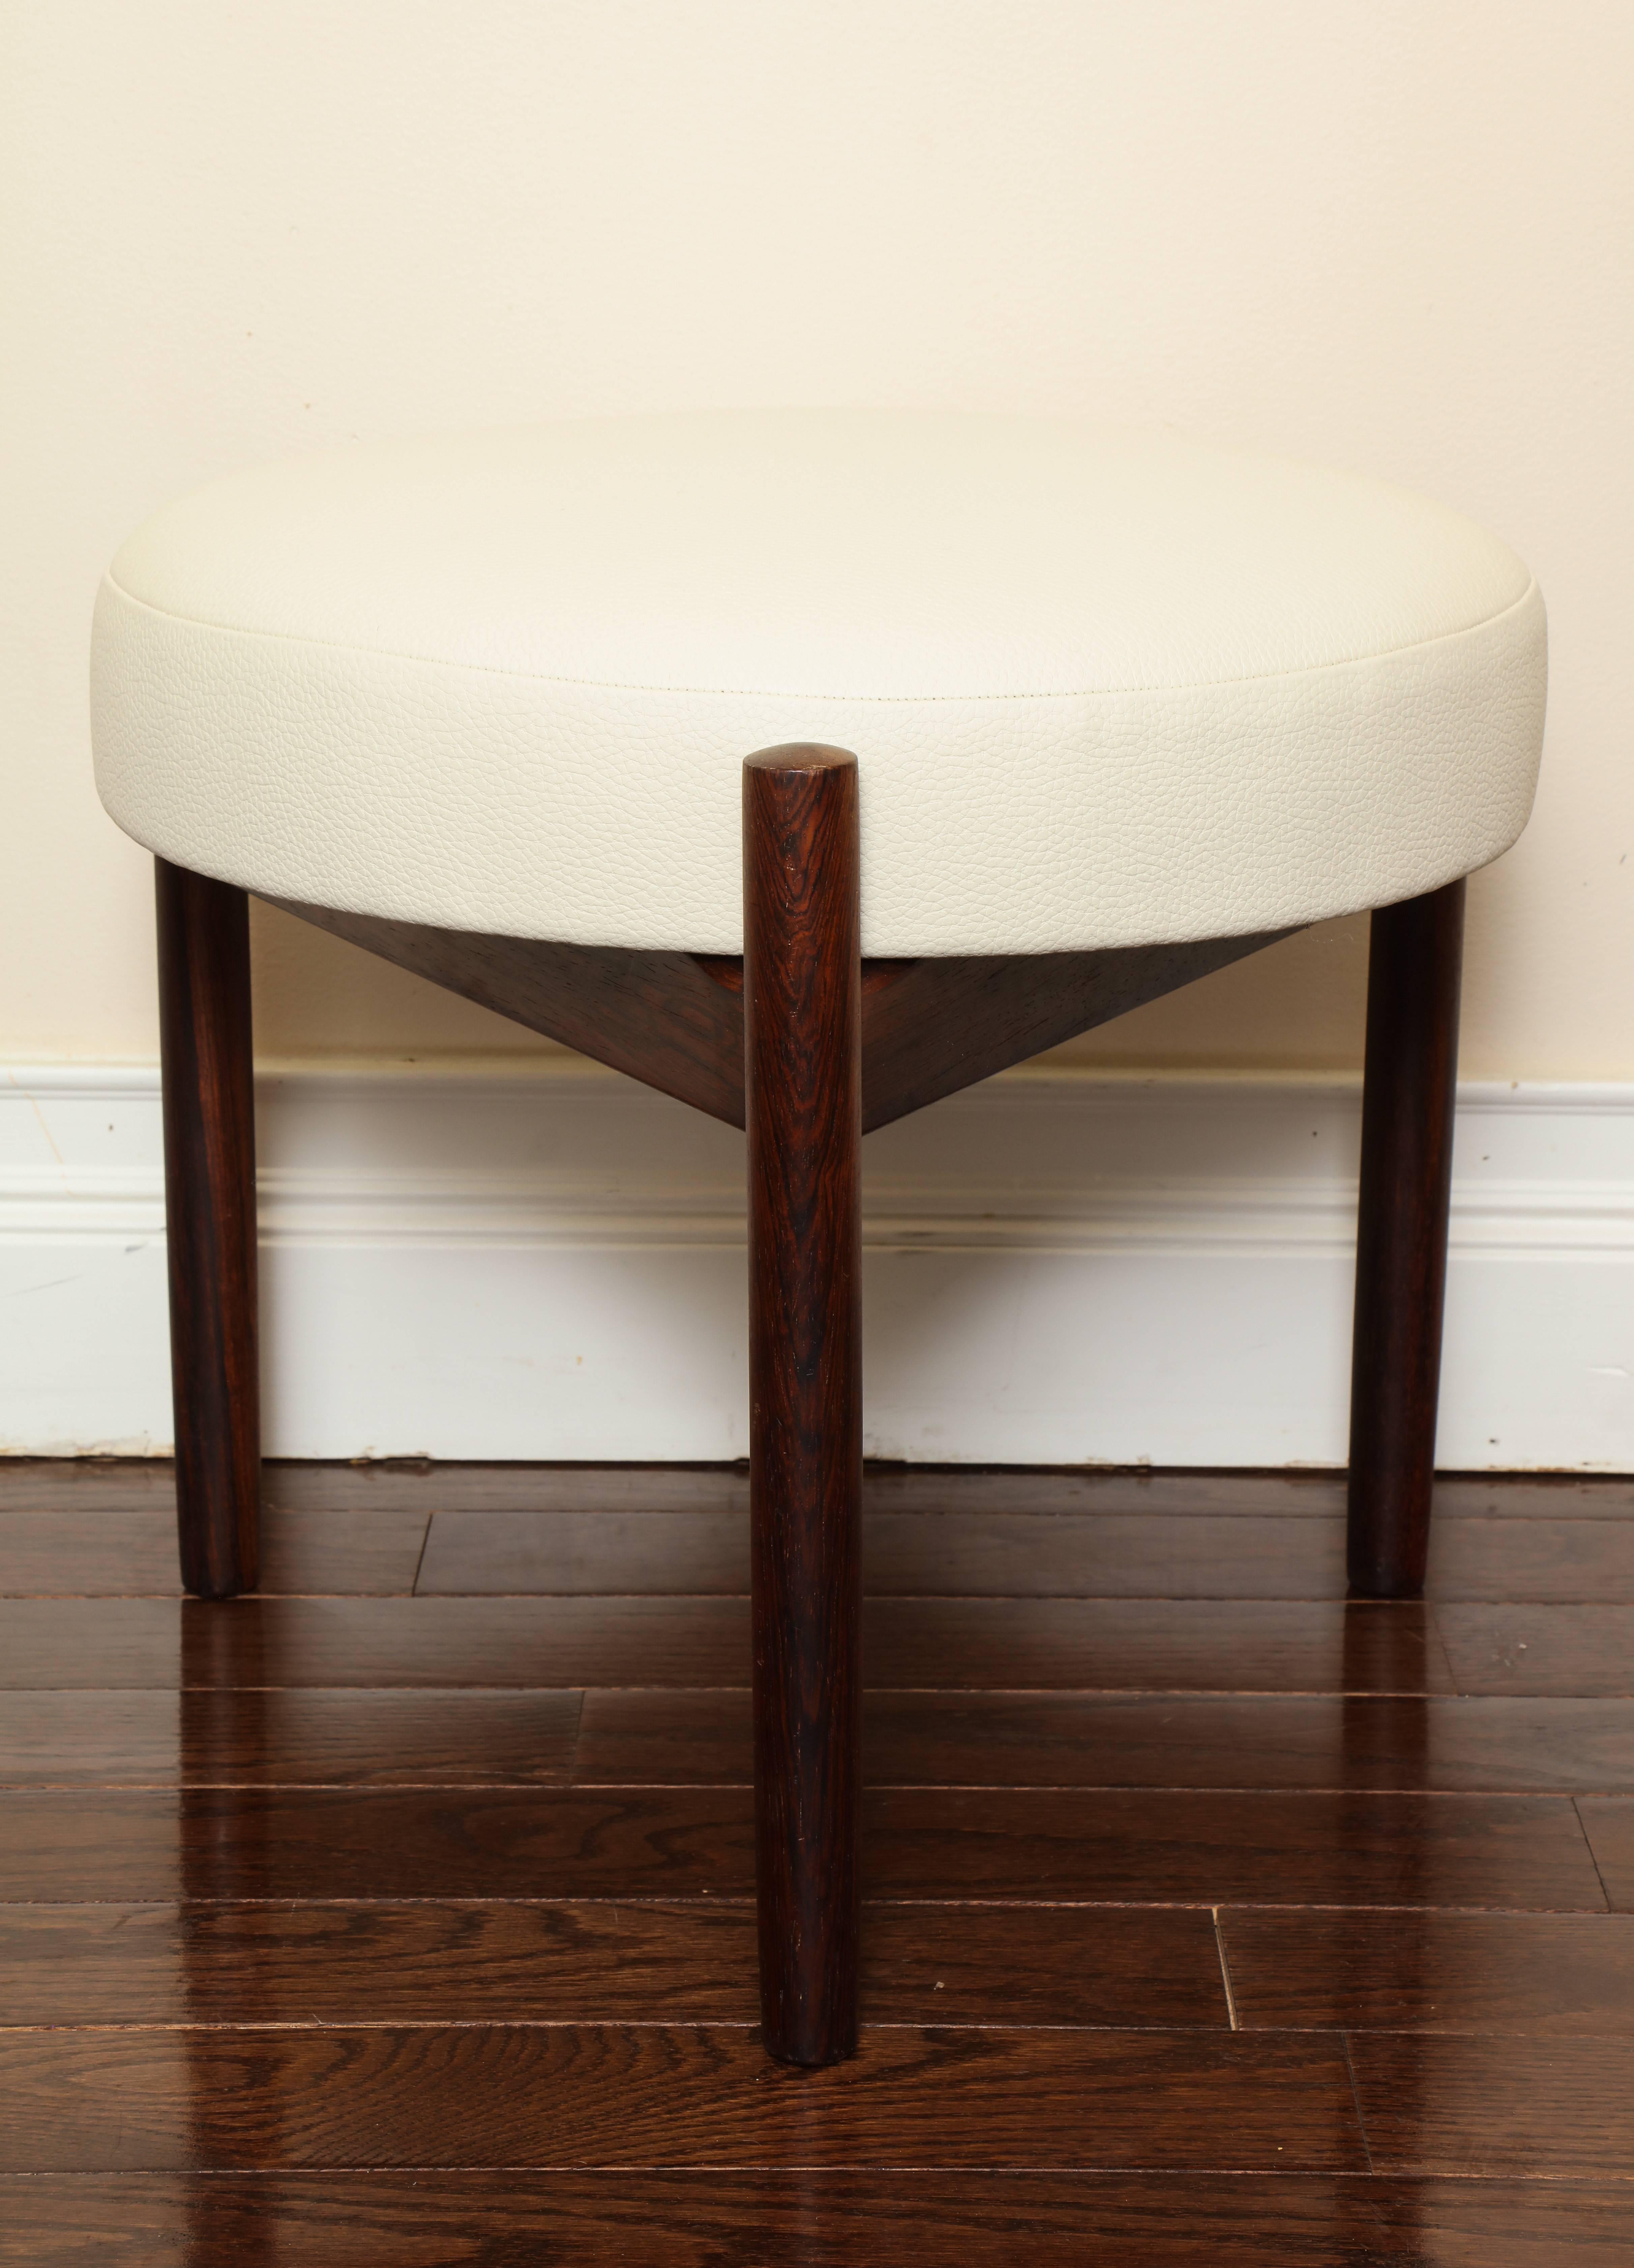 A Danish modern tripod triangular walnut stool with removable seat cushion; newly upholstered in creamy white pebble leather. 
Size: 16